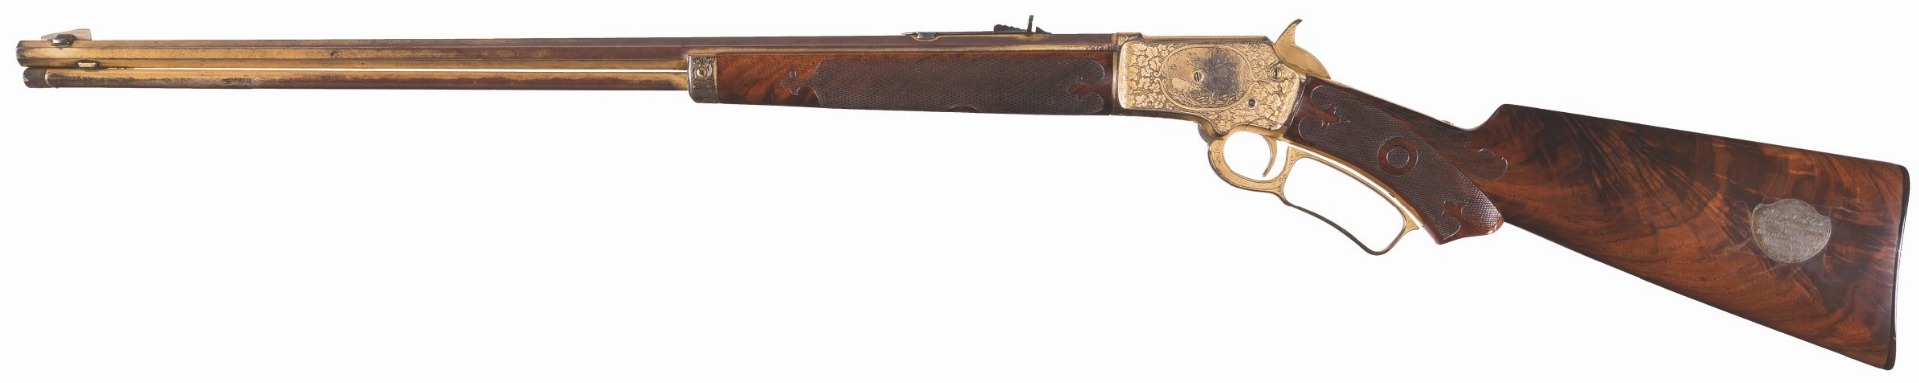 Annie Oakley gold Marlin M1897 lever action rifle